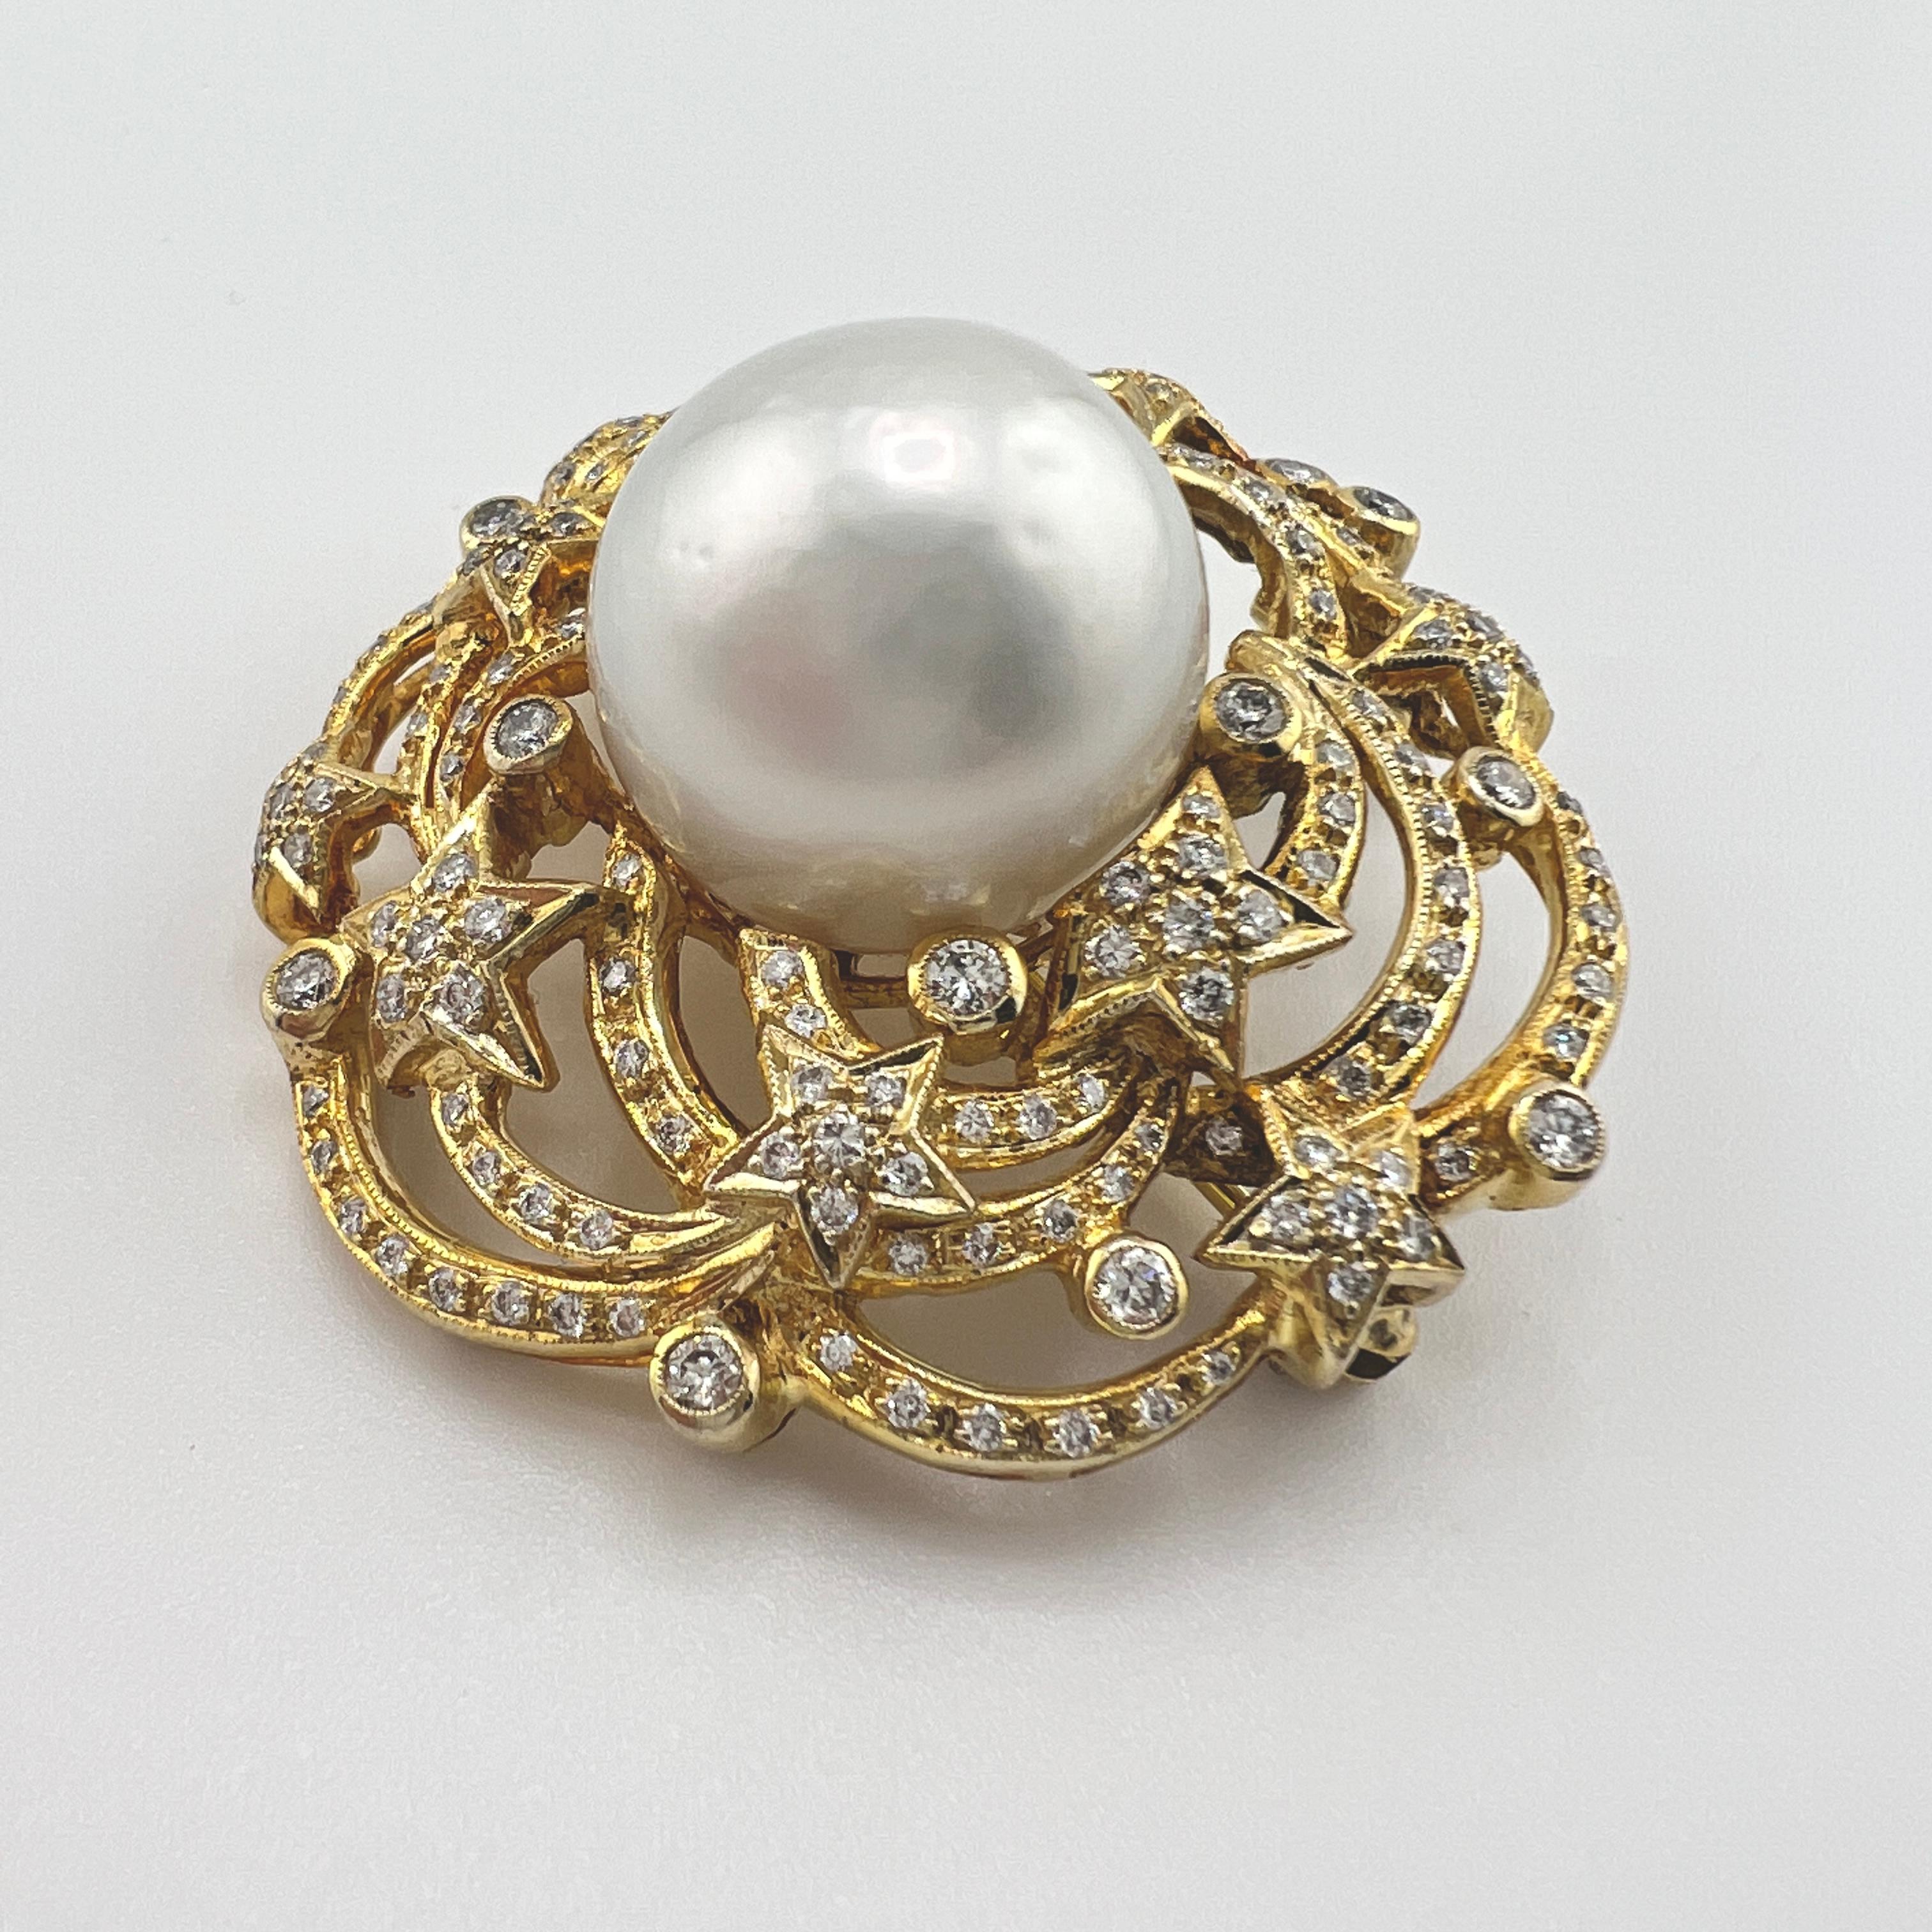 A 14k yellow gold pendant and brooch displaying a sea of diamond-encrusted stars centered by a wonderfully round 16mm South Seas pearl with incredible luster and mild blemishes. 